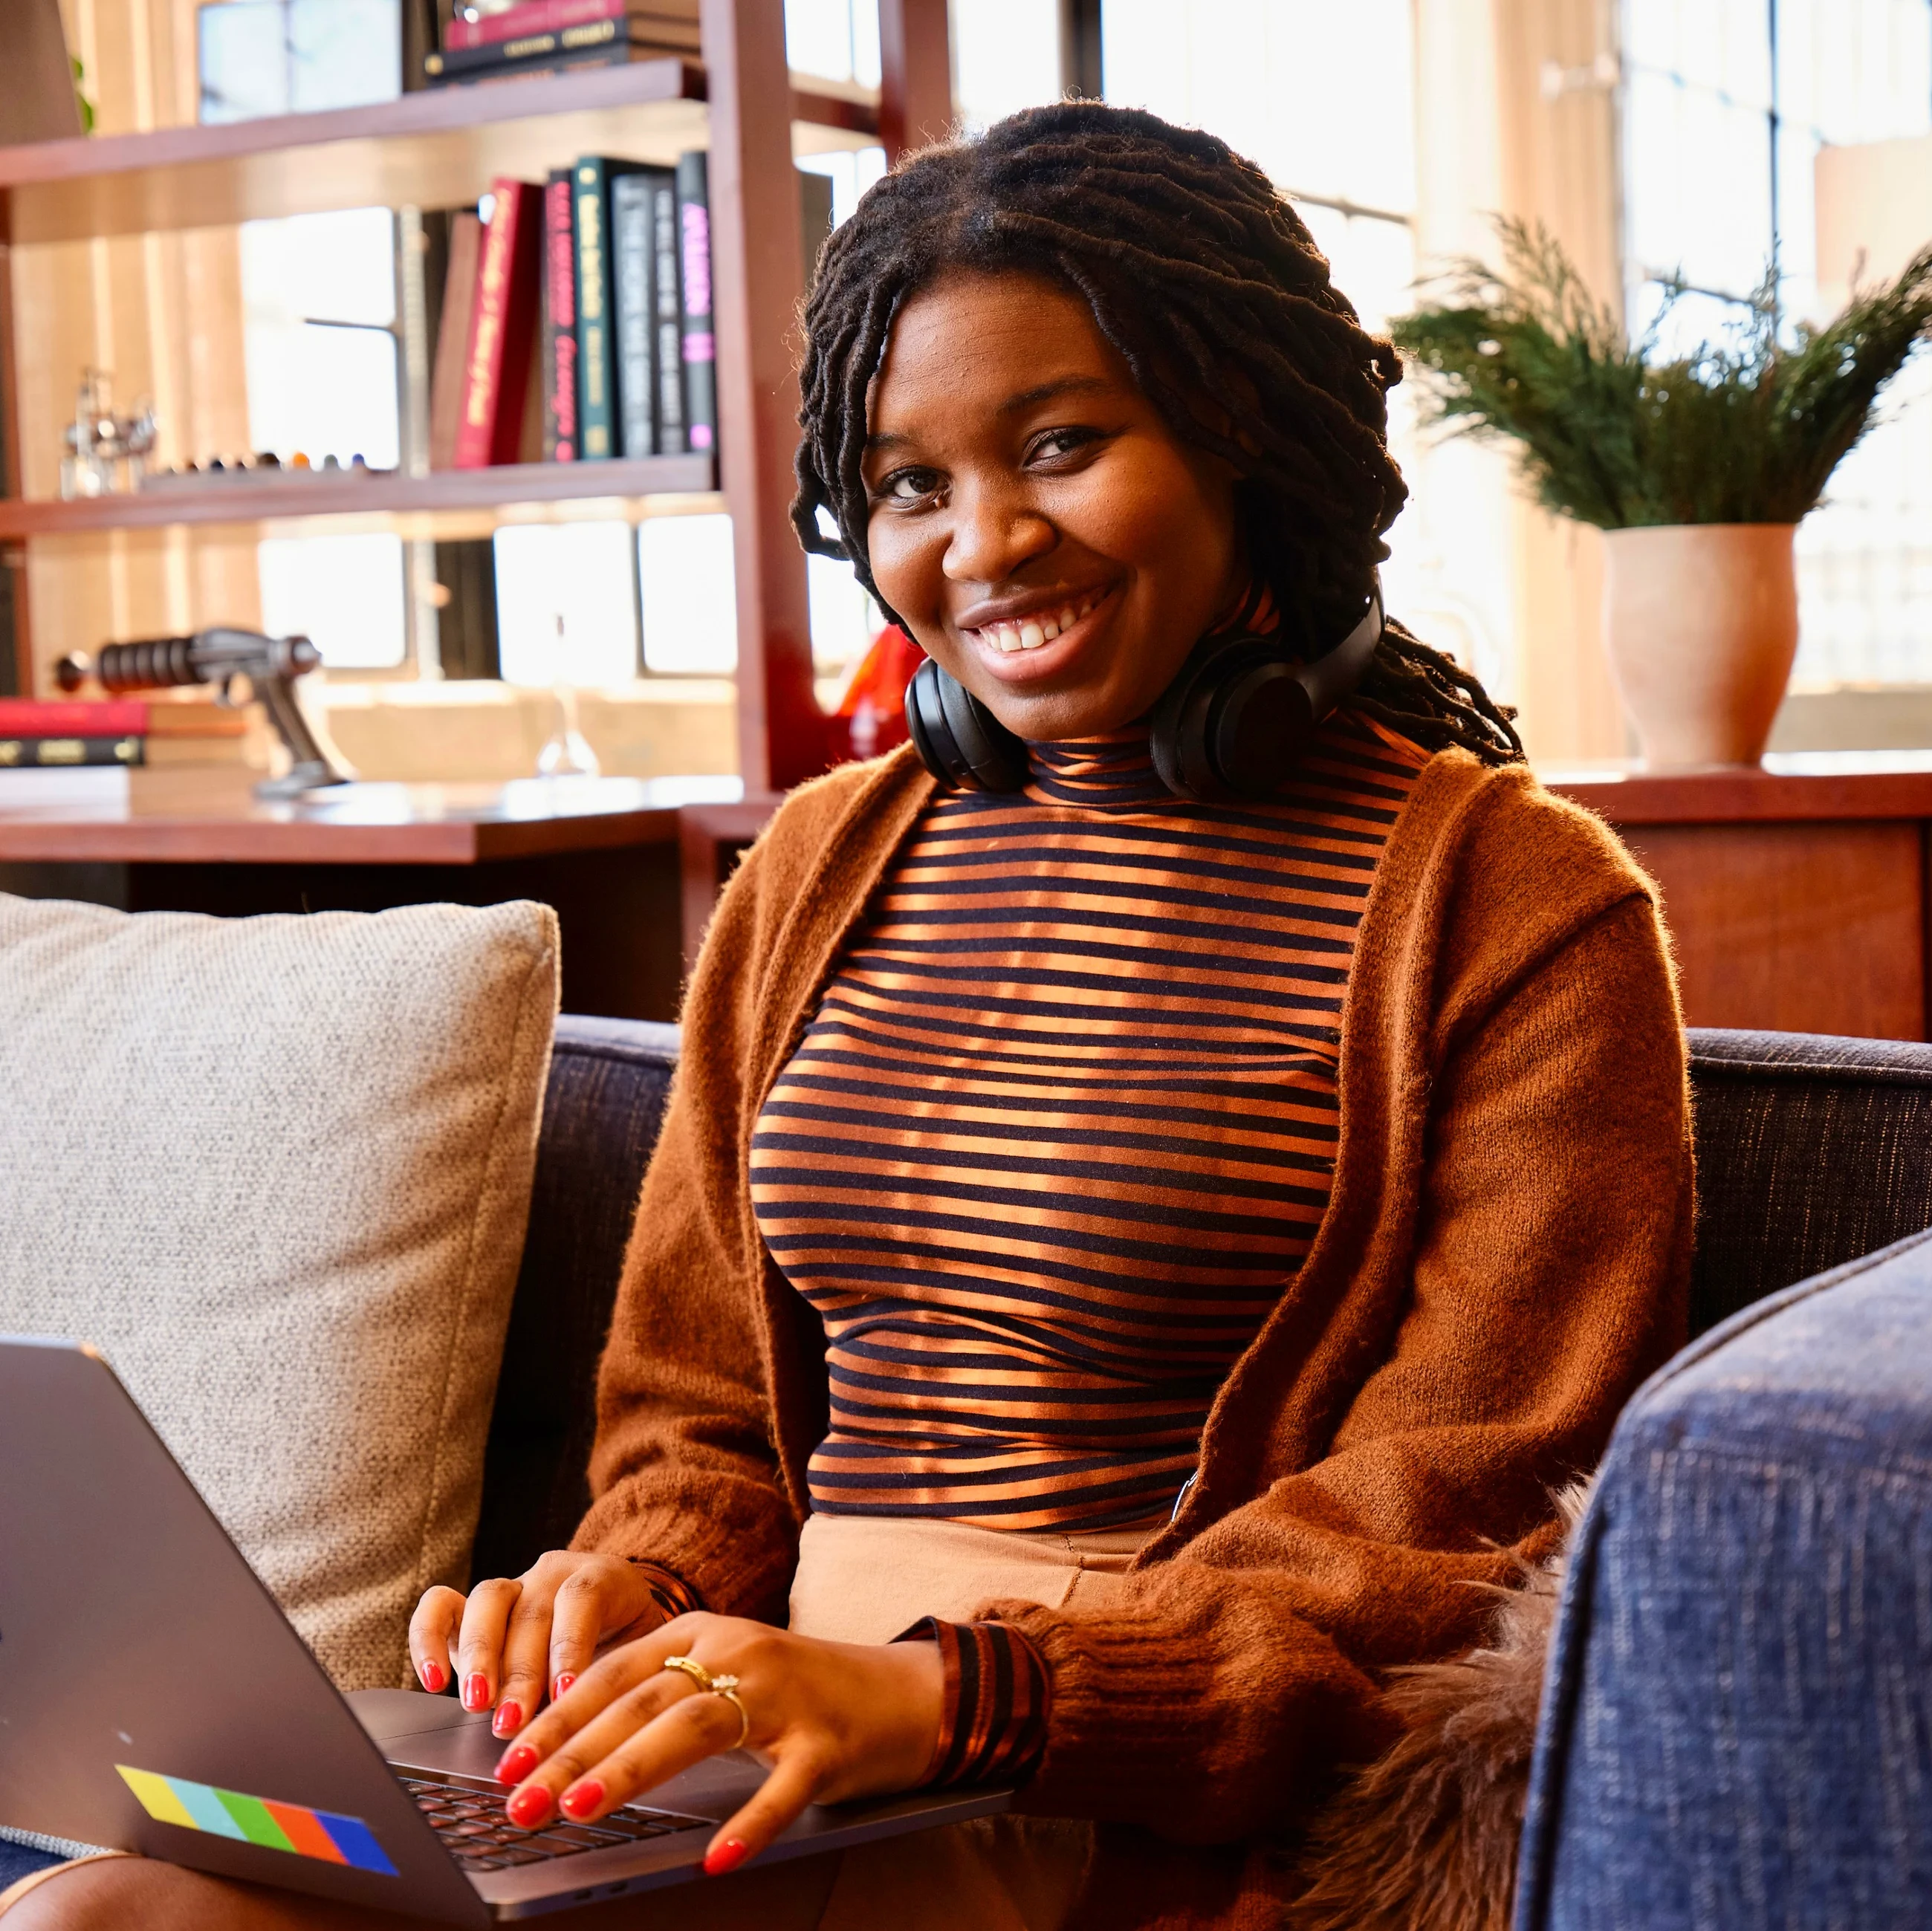 A smiling woman with headphones around her neck, working on a laptop in a cozy room with a bookshelf and a plant in the background. She's wearing a striped top and a brown cardigan.